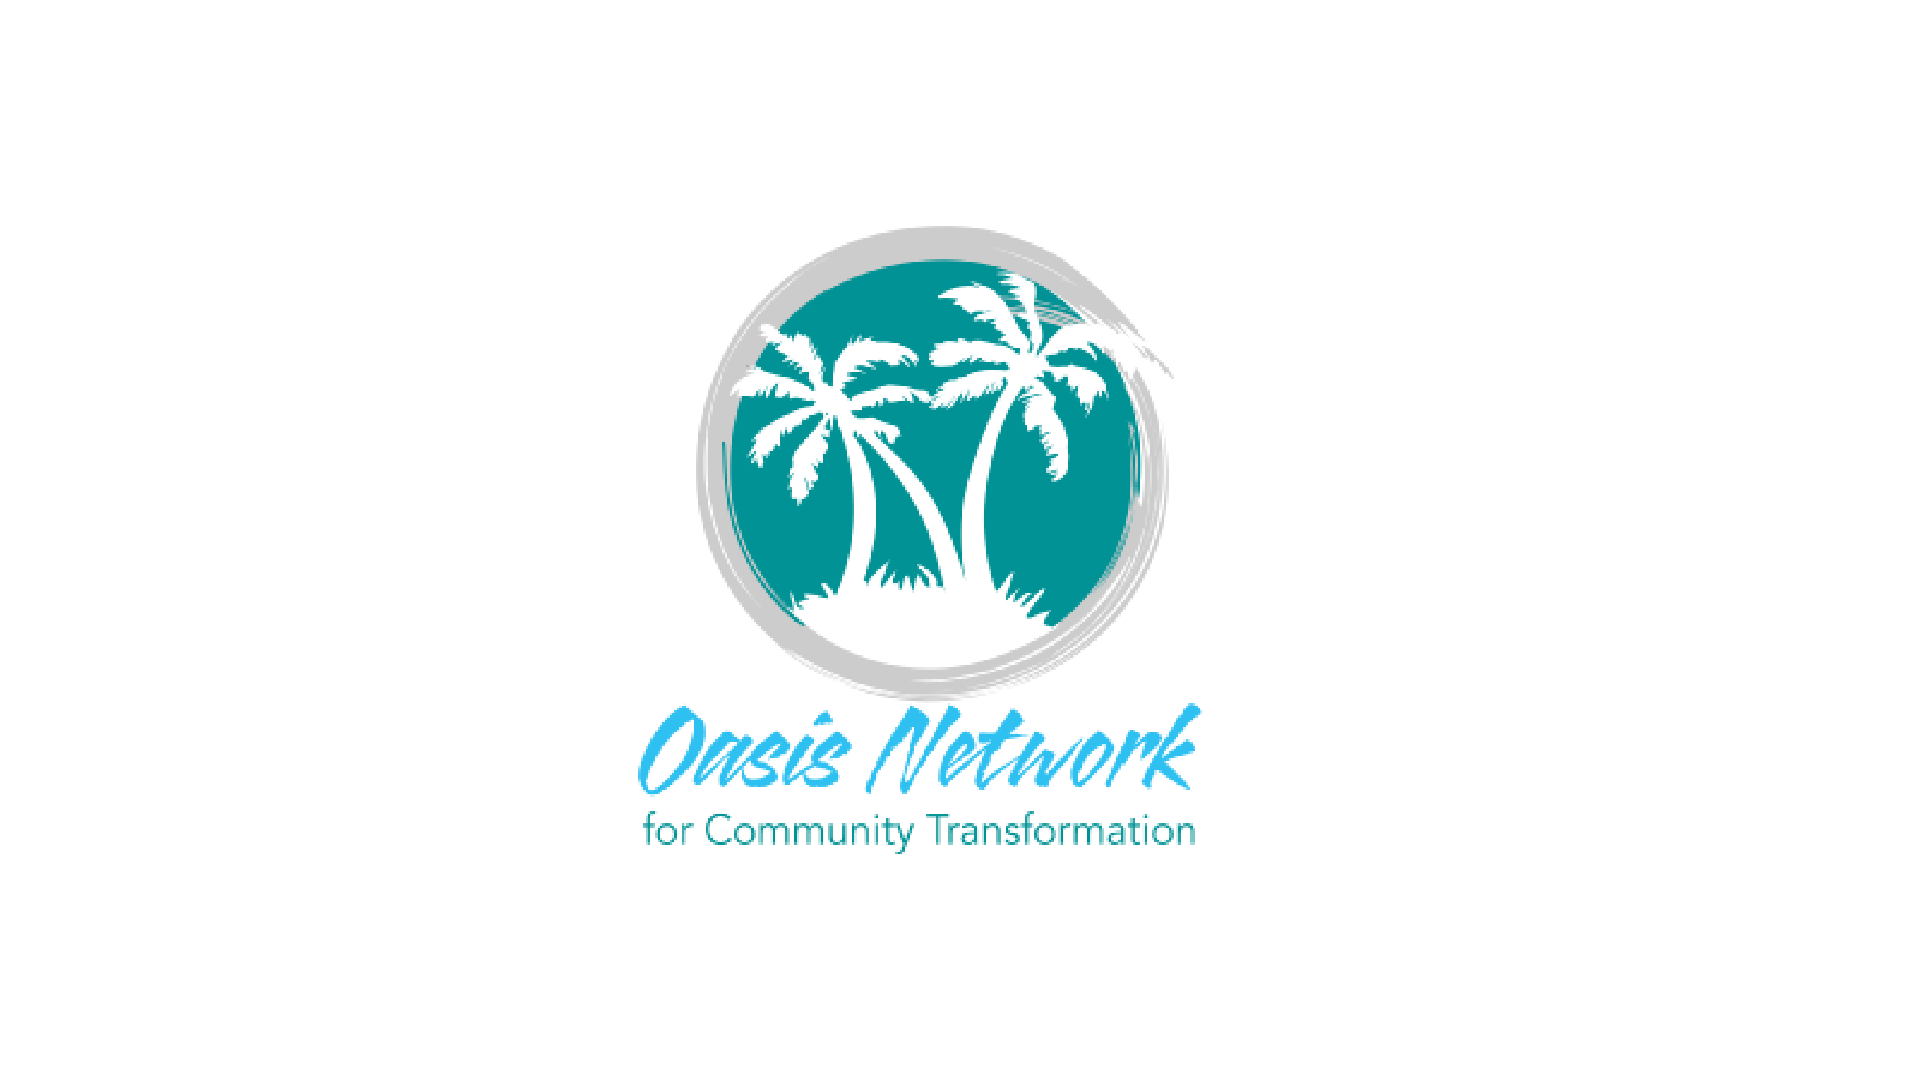 Oasis Network For Community Transformation logo